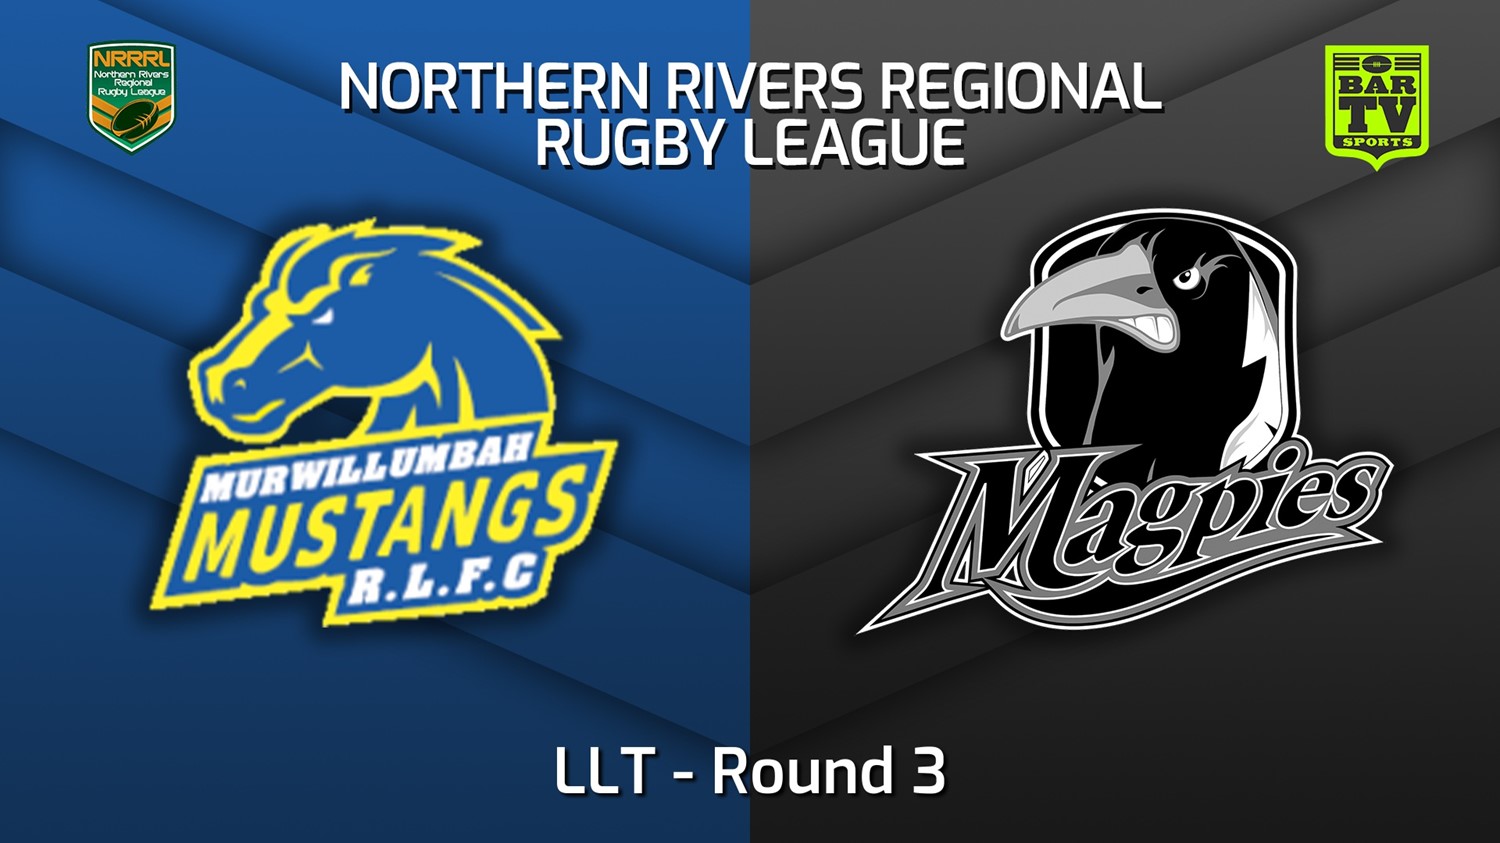 220508-Northern Rivers Round 3 - LLT - Murwillumbah Mustangs v Lower Clarence Magpies Slate Image